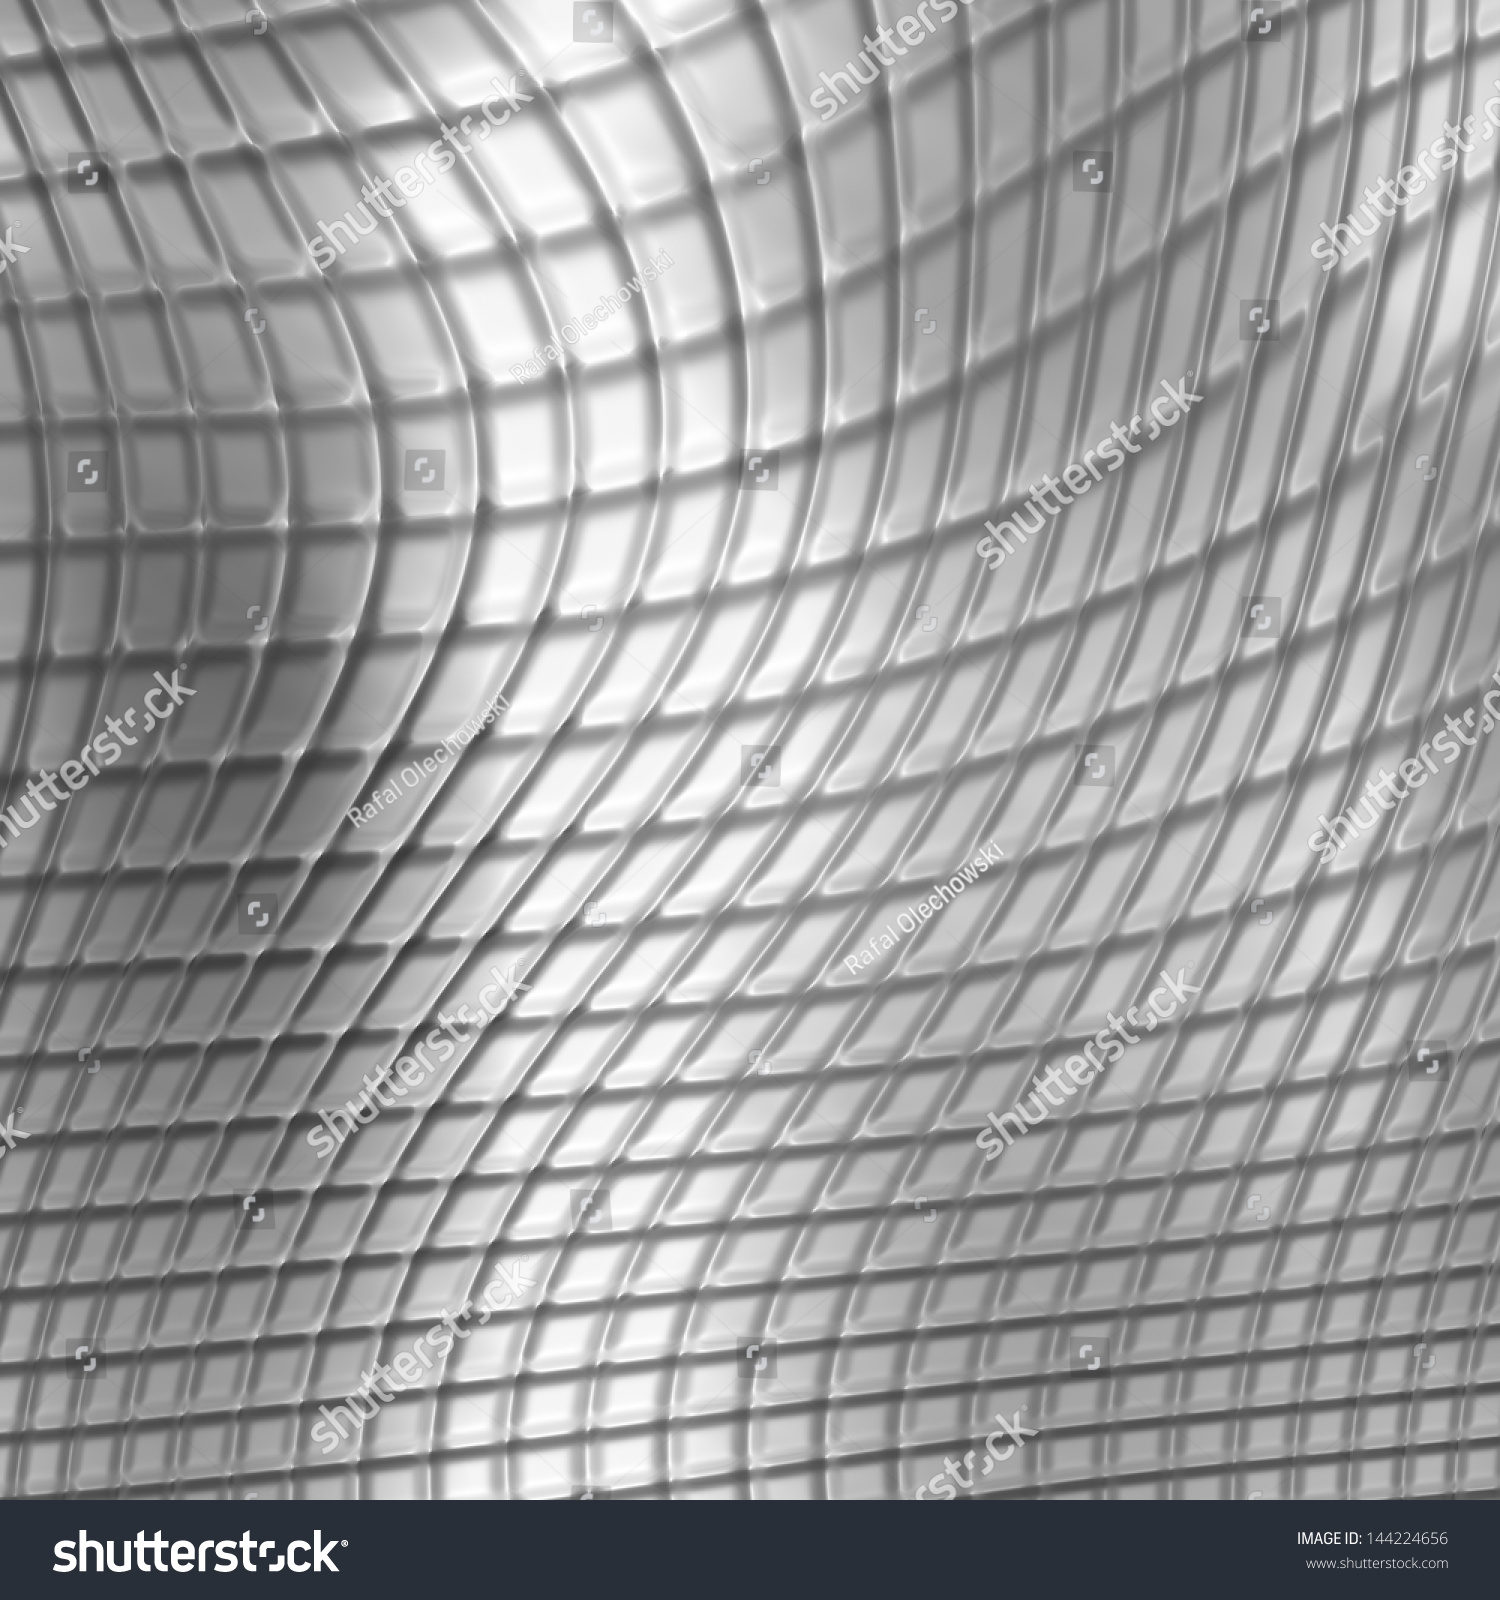 Royalty-free Metal silver checked pattern background #144224656 ...